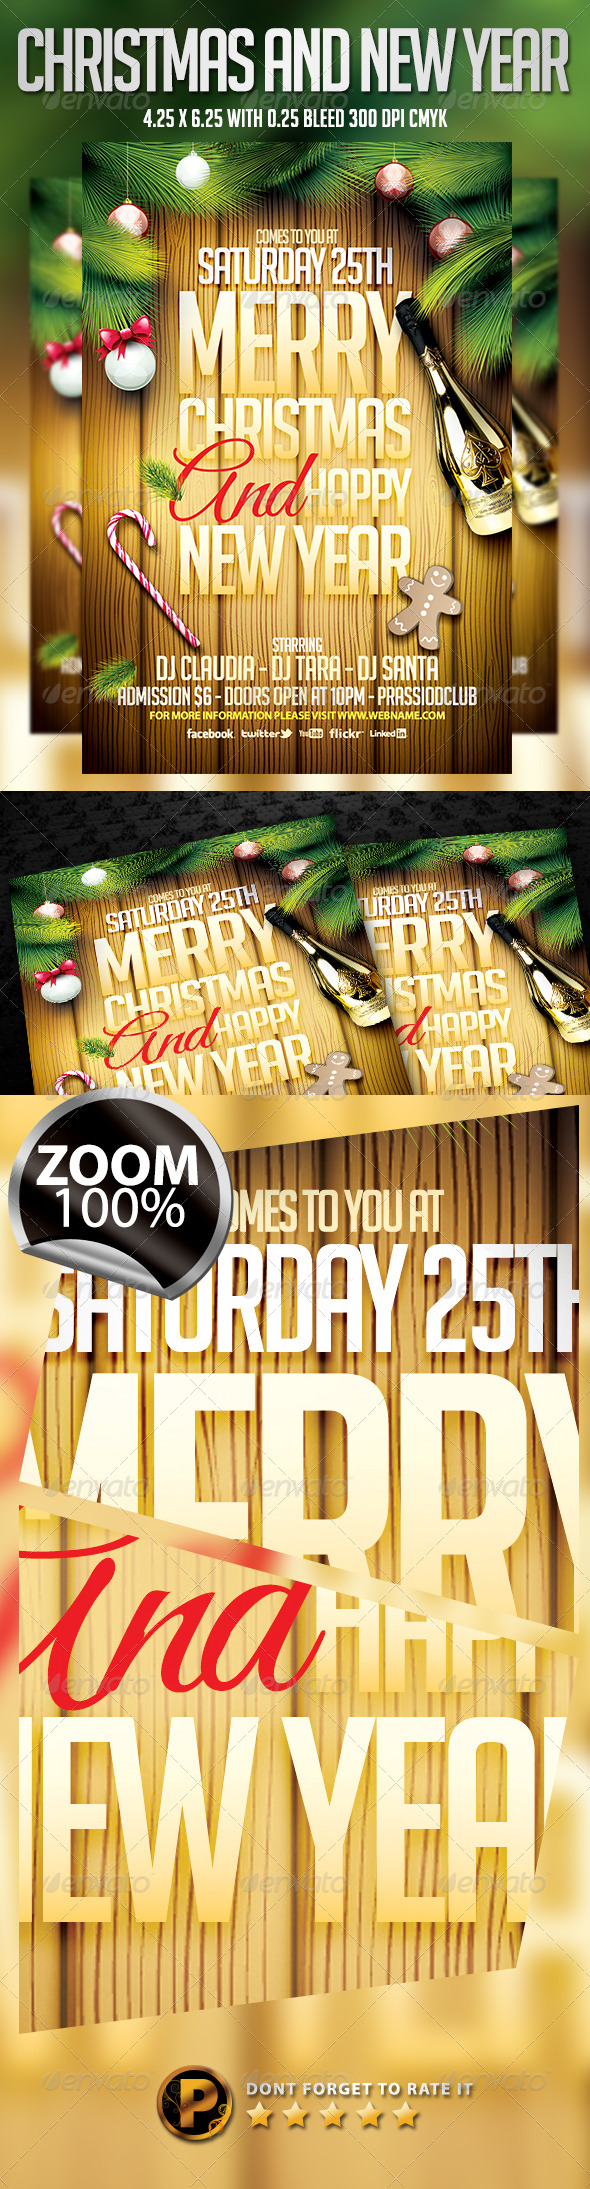 Christmas And New Year Flyer Template